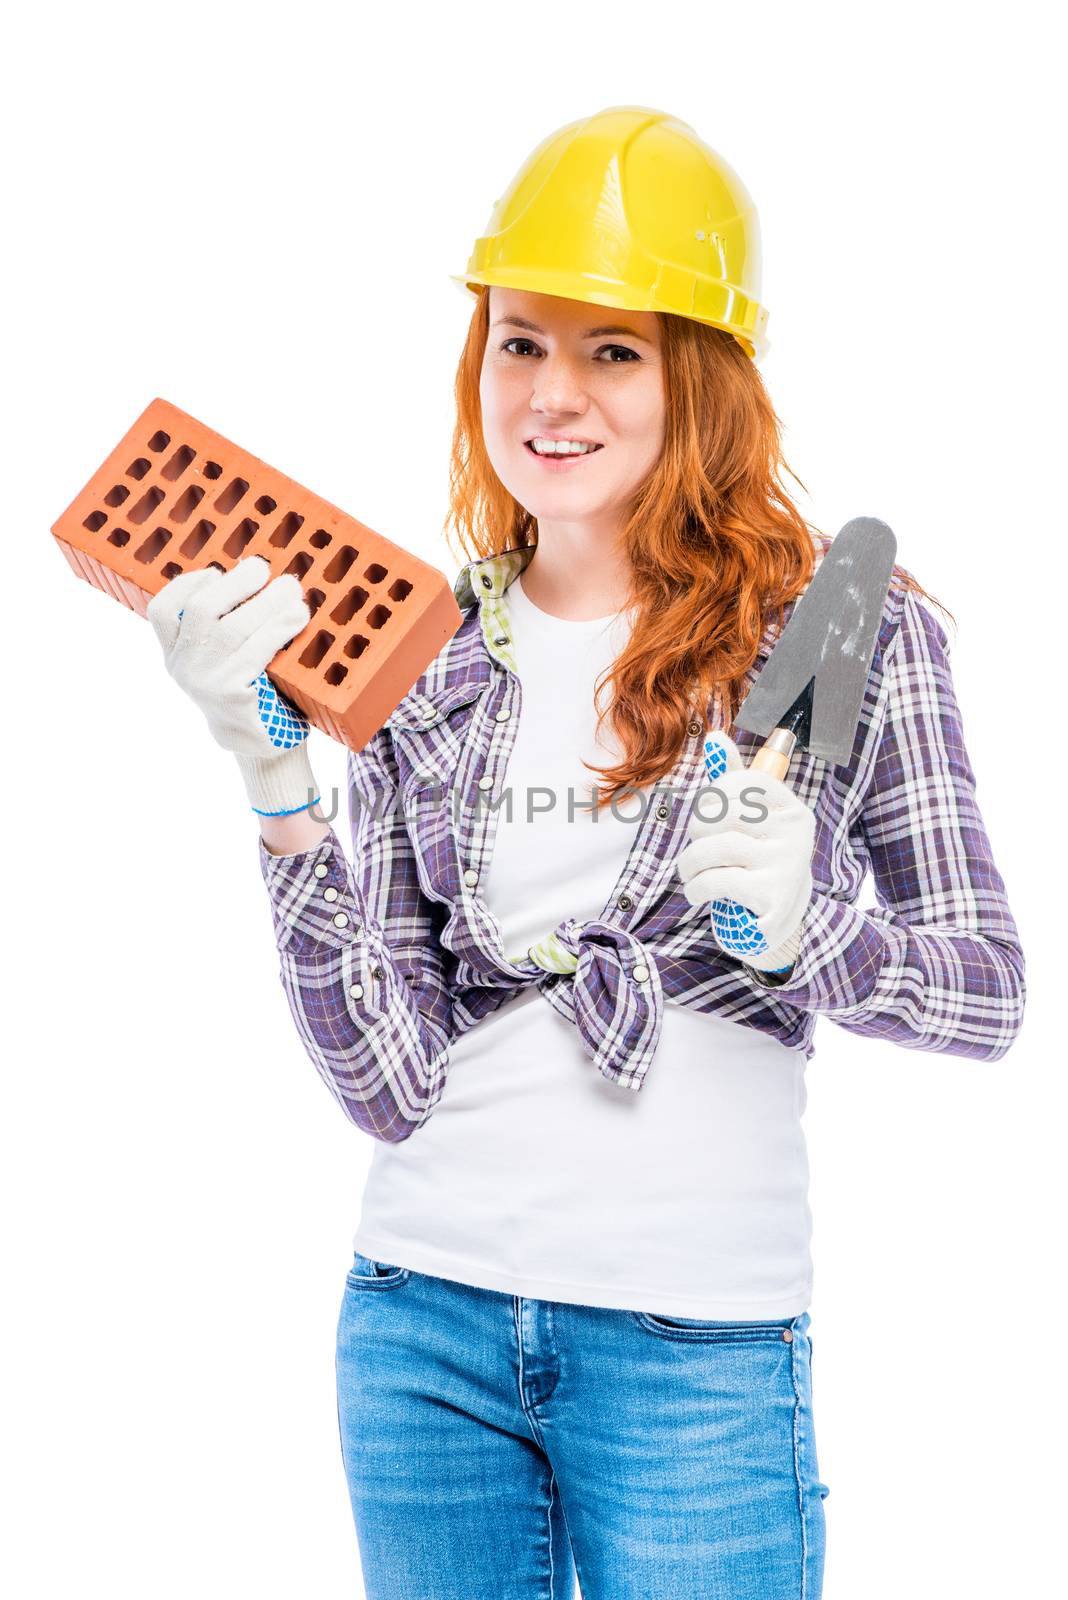 man's profession builder, portrait of woman with brick in yellow helmet